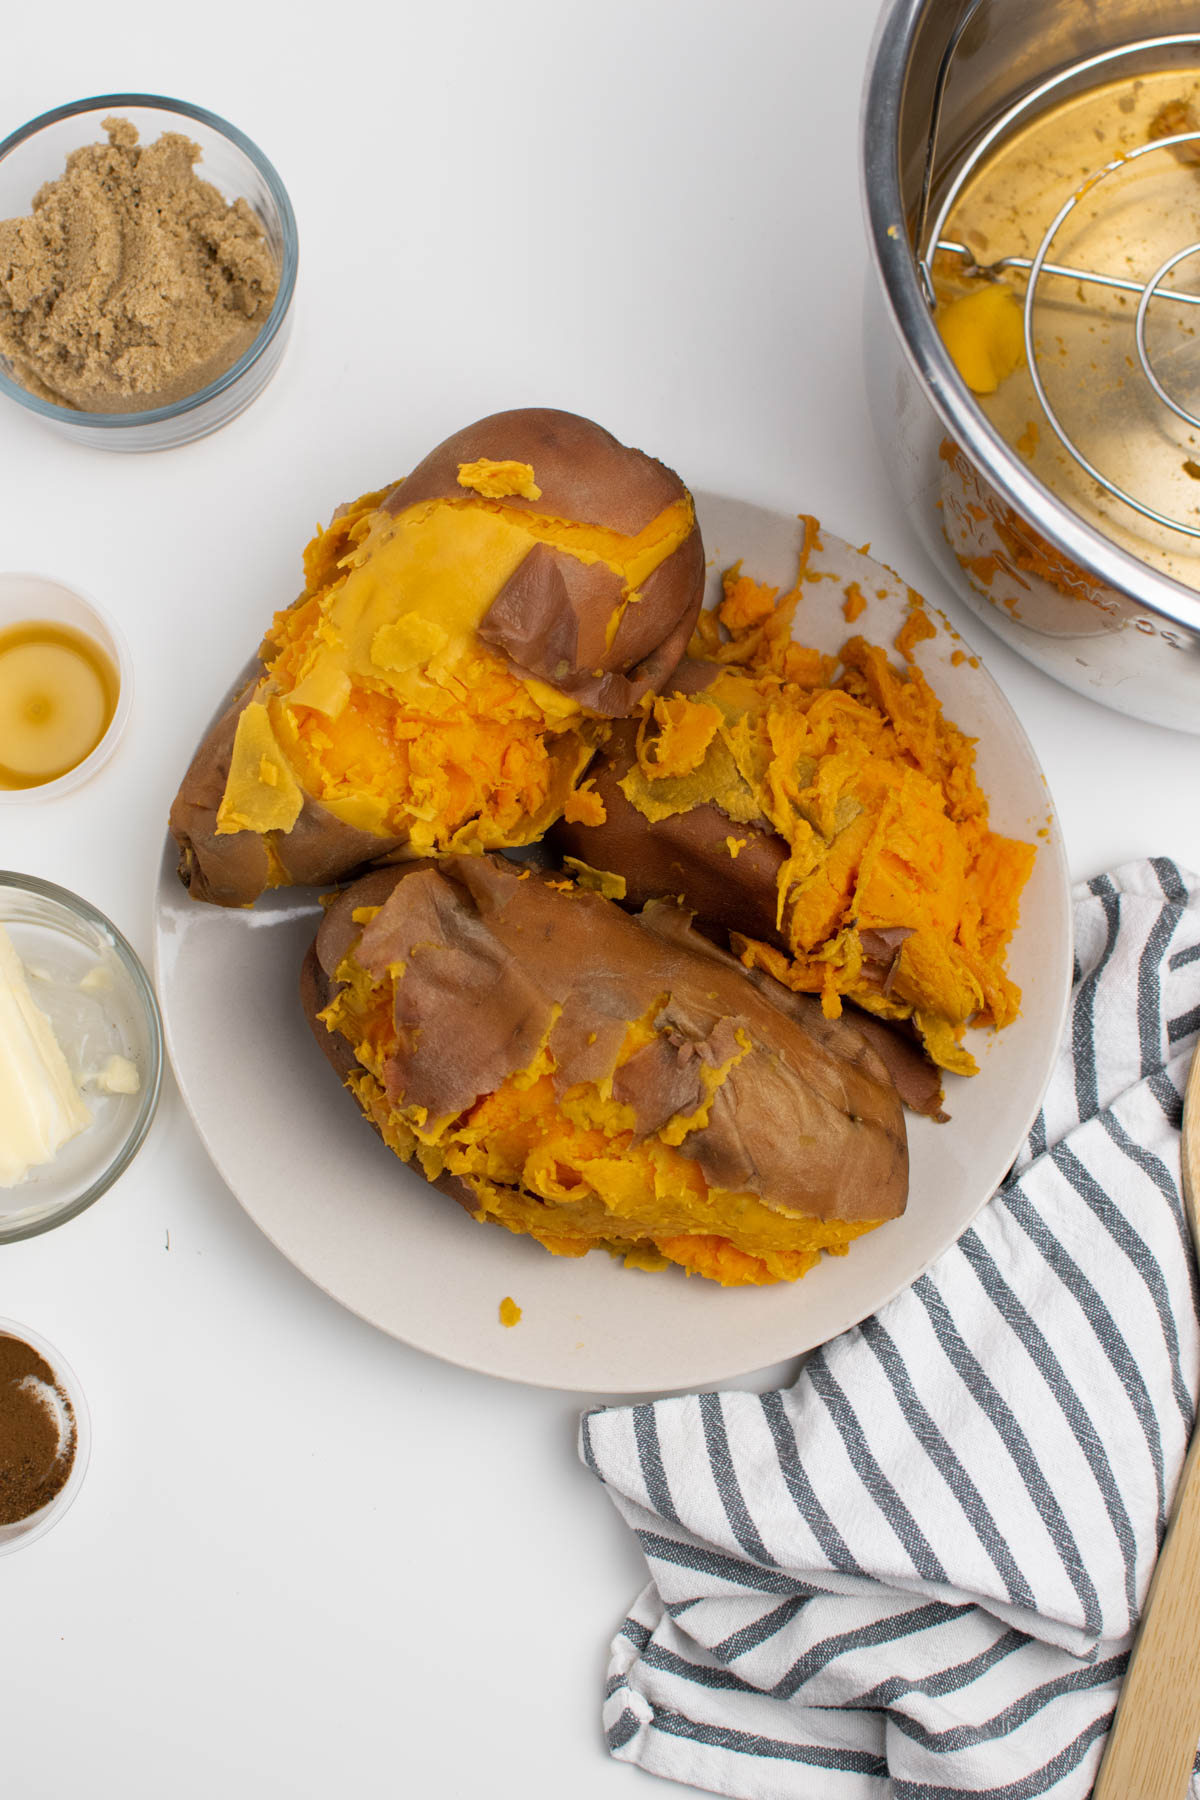 Cooked sweet potatoes with skins coming off on plate surrounded by various ingredients.